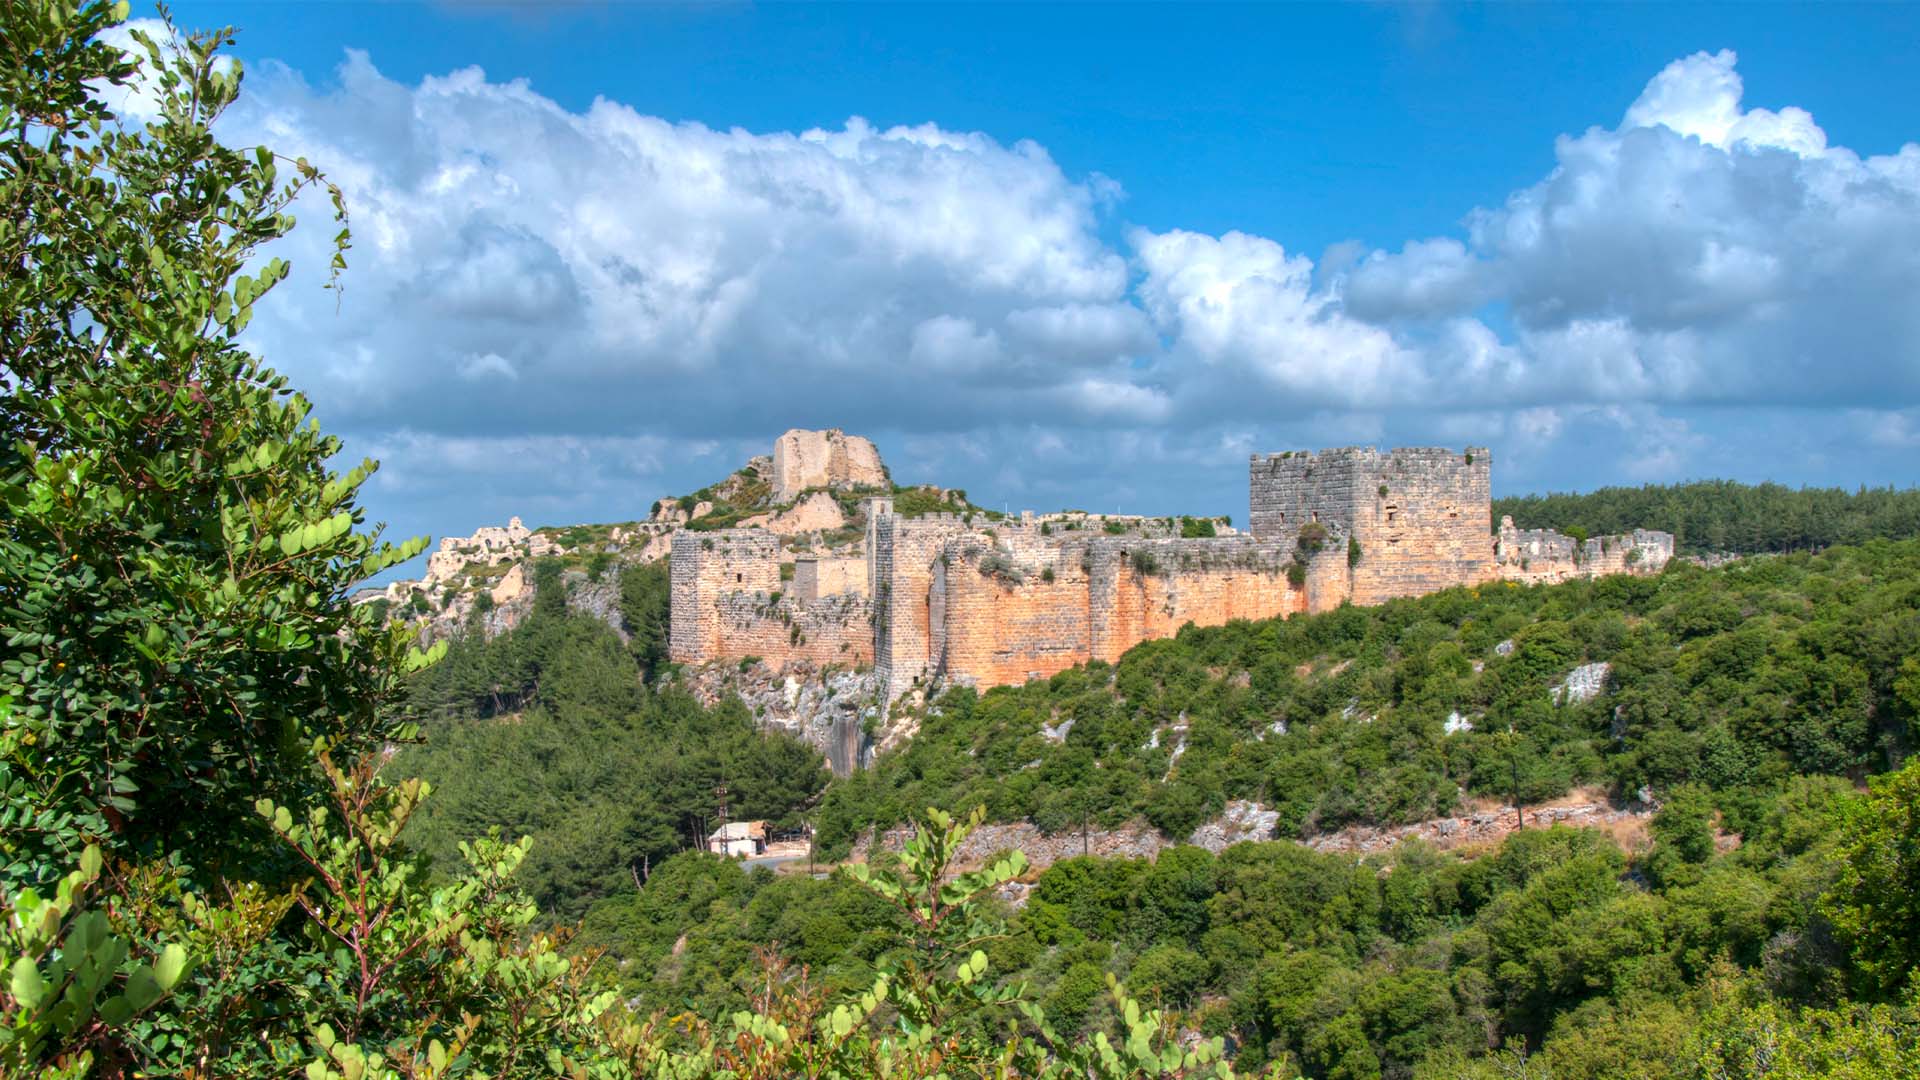 In this panoramic photograph, the historic fortress of Saladin Castle is captured, perched atop a strategic hilltop. It provides sweeping vistas of the surrounding landscape, including breathtaking views of the Mediterranean Sea.